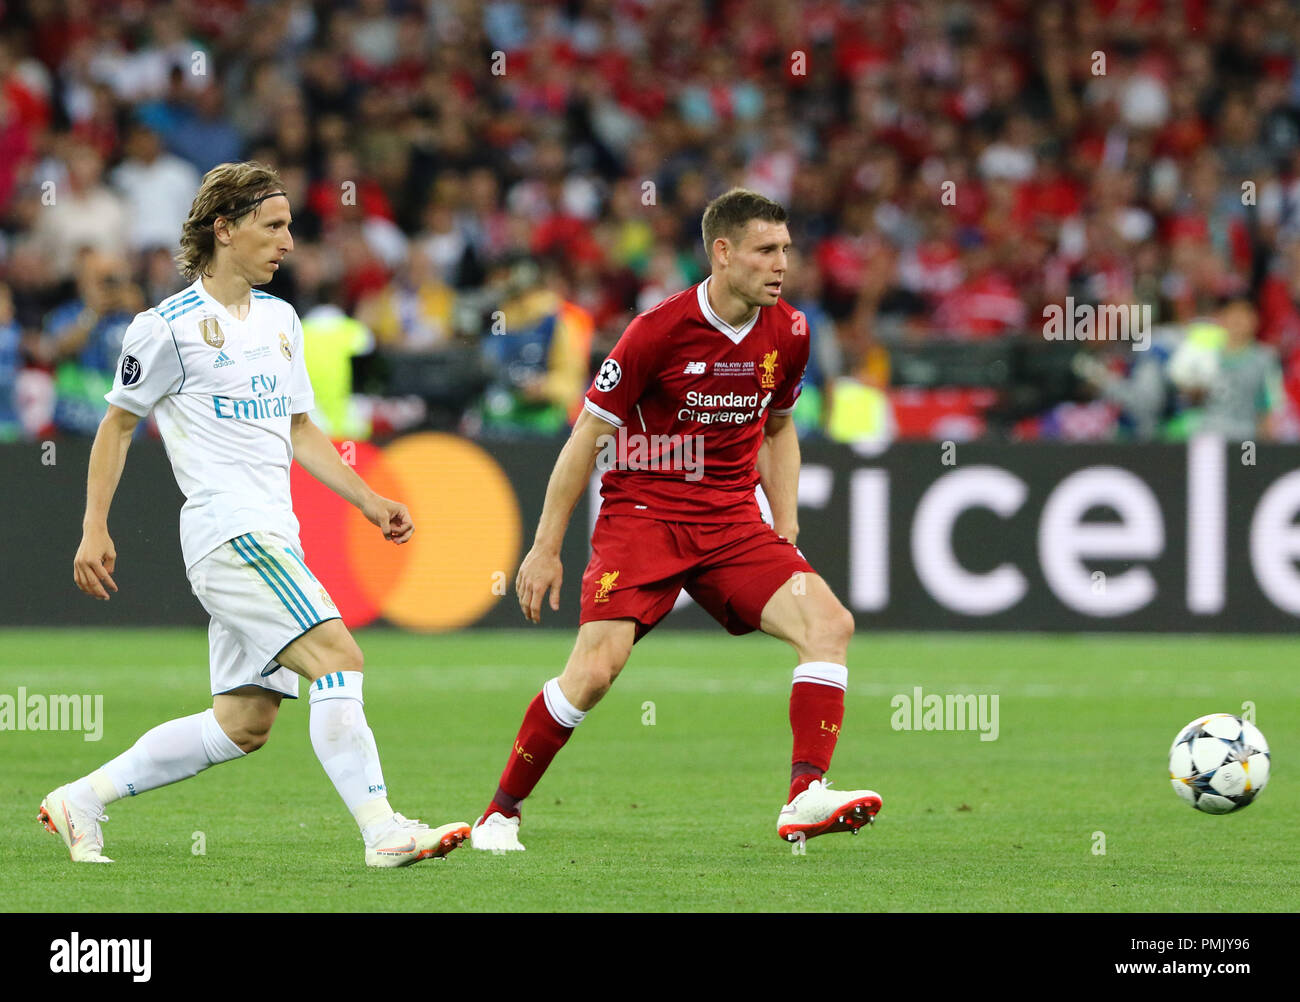 KYIV, UKRAINE - MAY 26, 2018: Luka Modric of Real Madrid (L) fights for a ball with James Milner of Liverpool during their UEFA Champions League Final Stock Photo